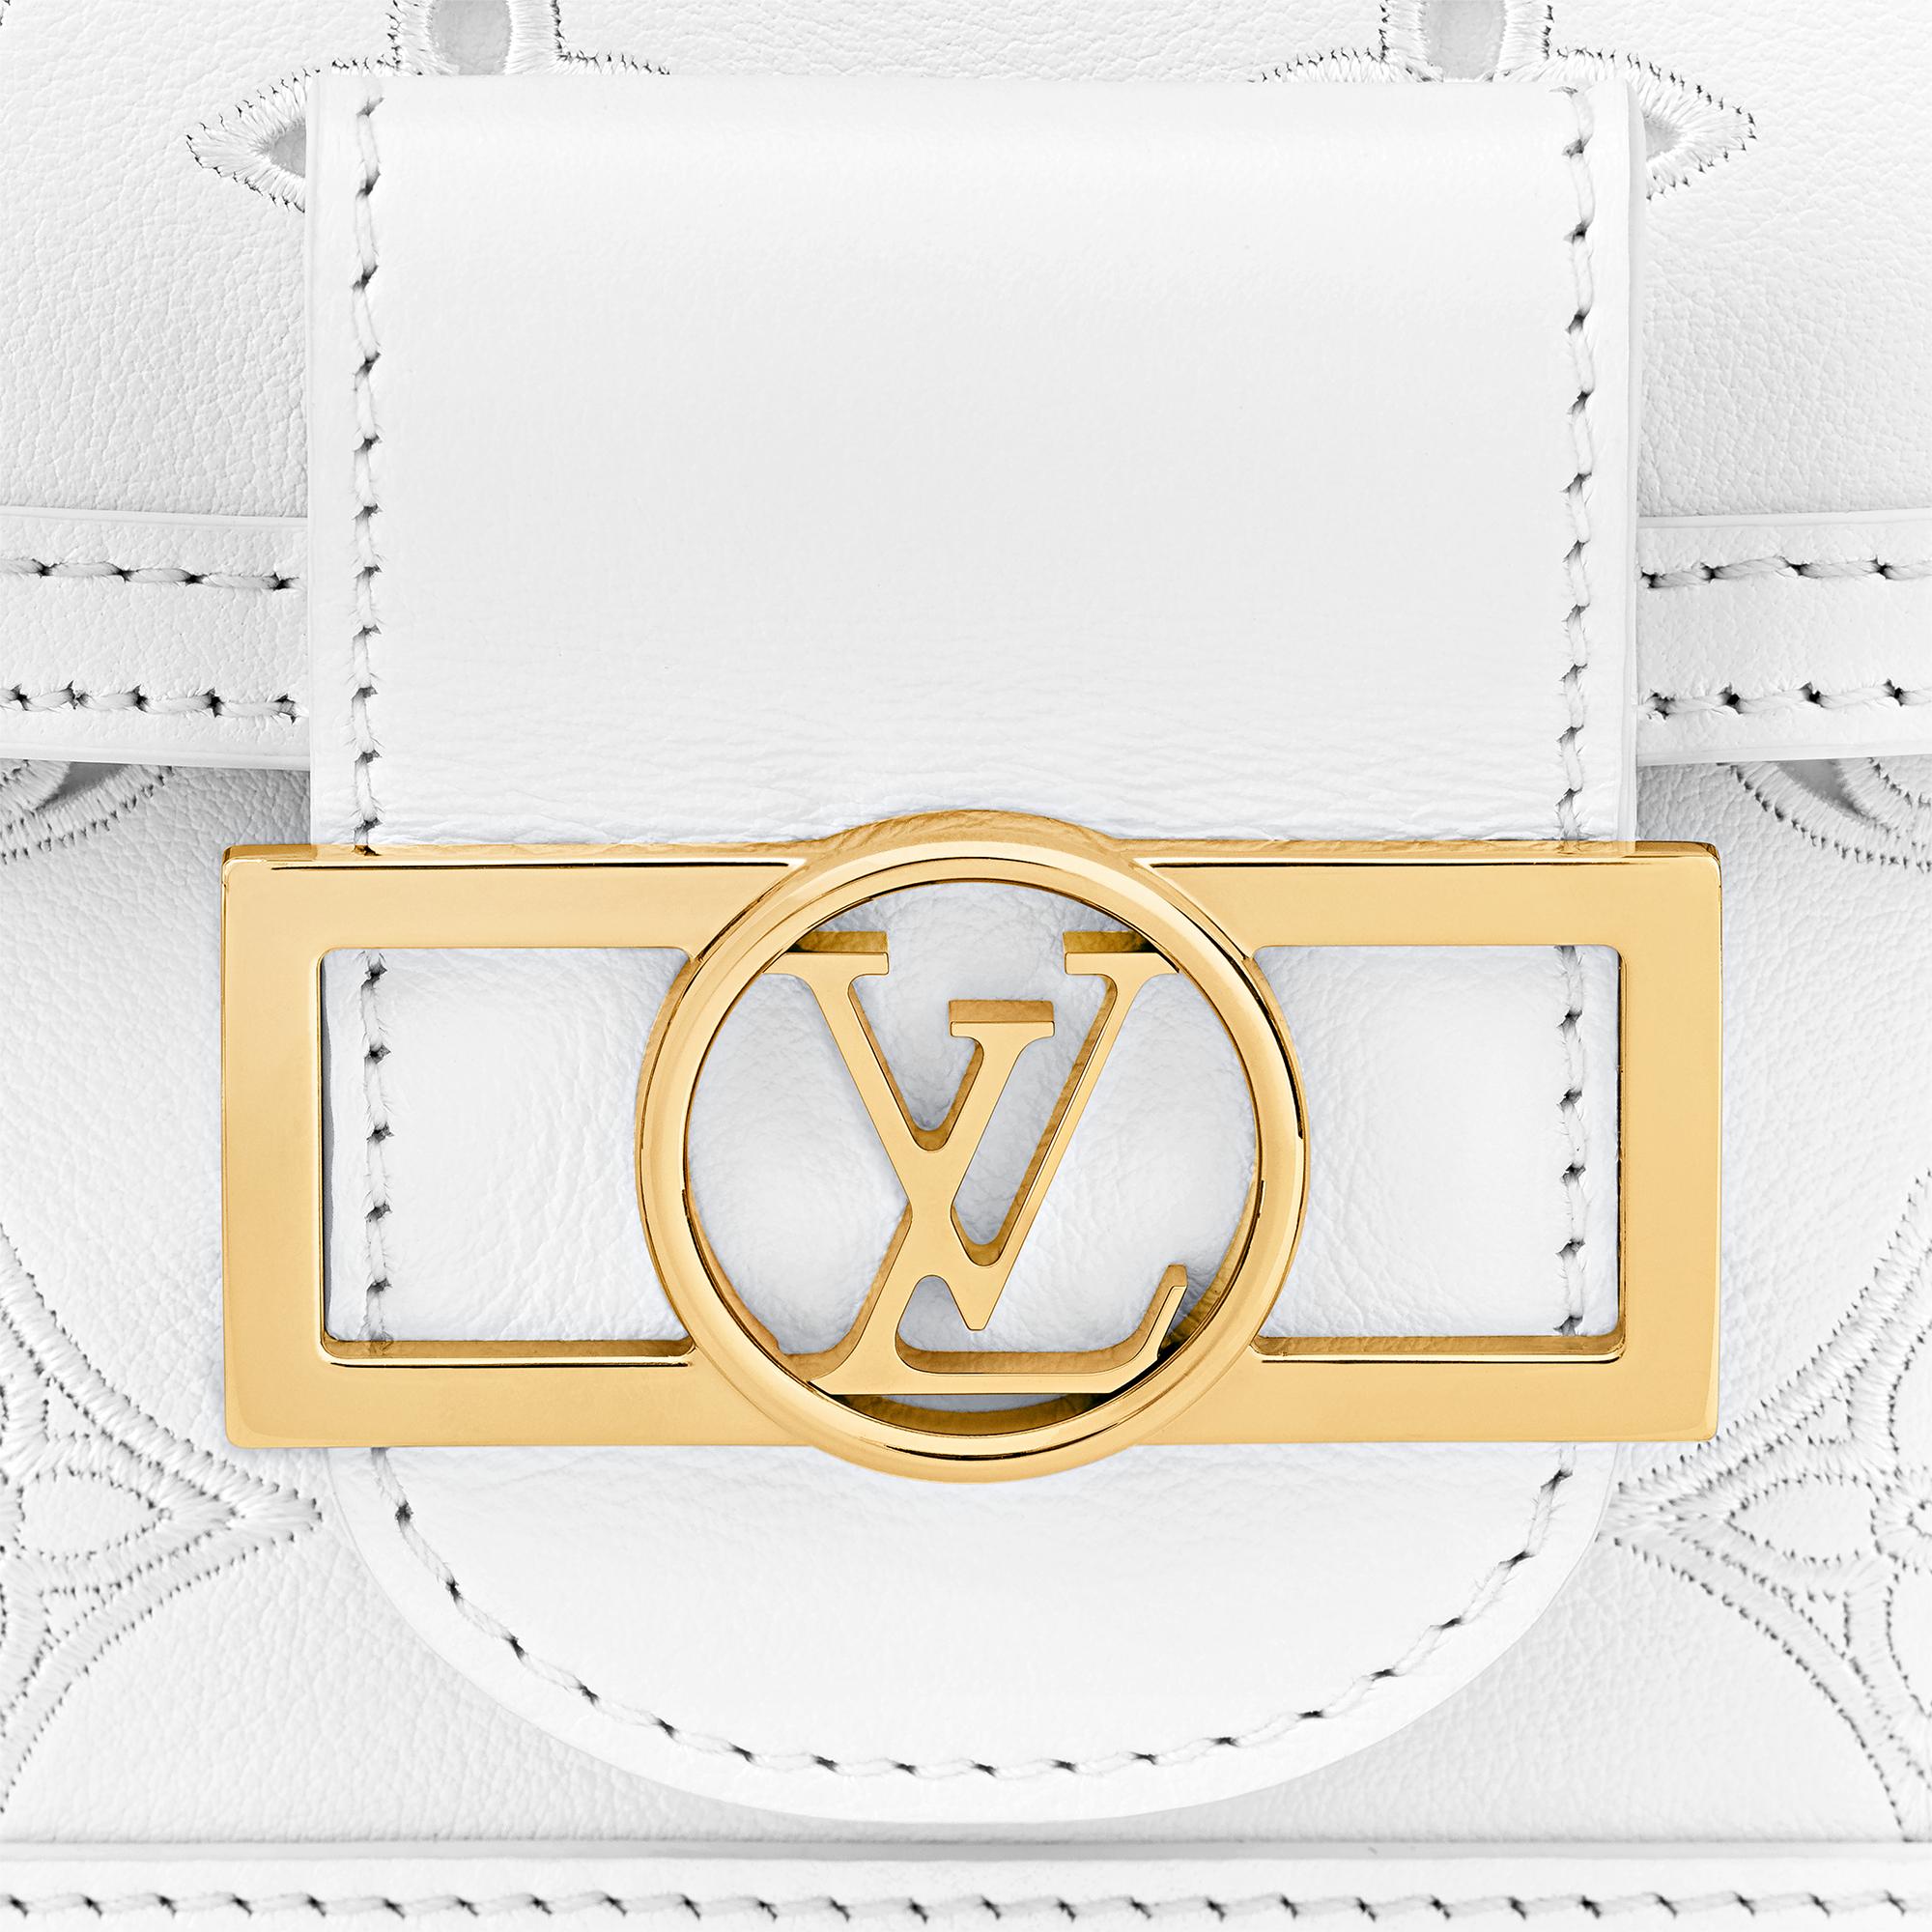 Top Original Louis Vuitton M20730.M20739 Dauphine East West Bag in White  (Cutout) from LV Broderie Anglaise Capsule Collection from Linda Size: 24.5  X 13.5 X 9cm : r/RepladiesDesigner